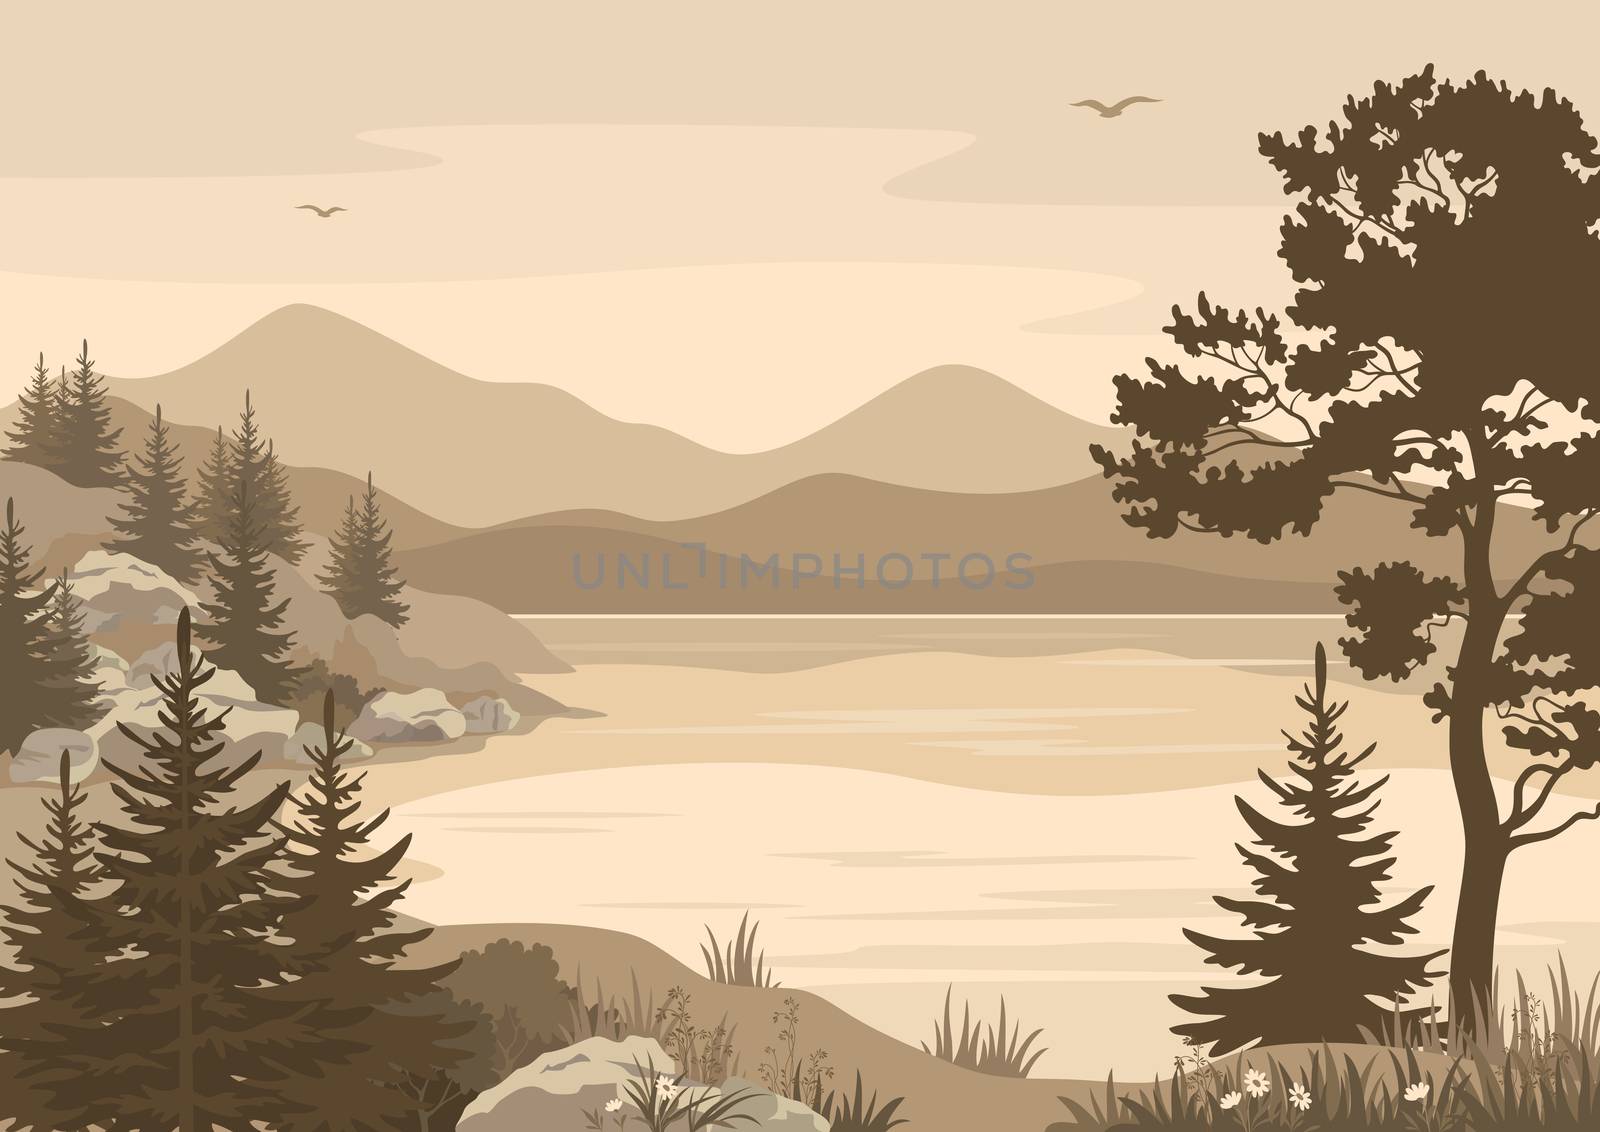 Landscapes, Lake, Mountains with Trees, Flowers and Grass, Birds in the Sky Silhouettes. 